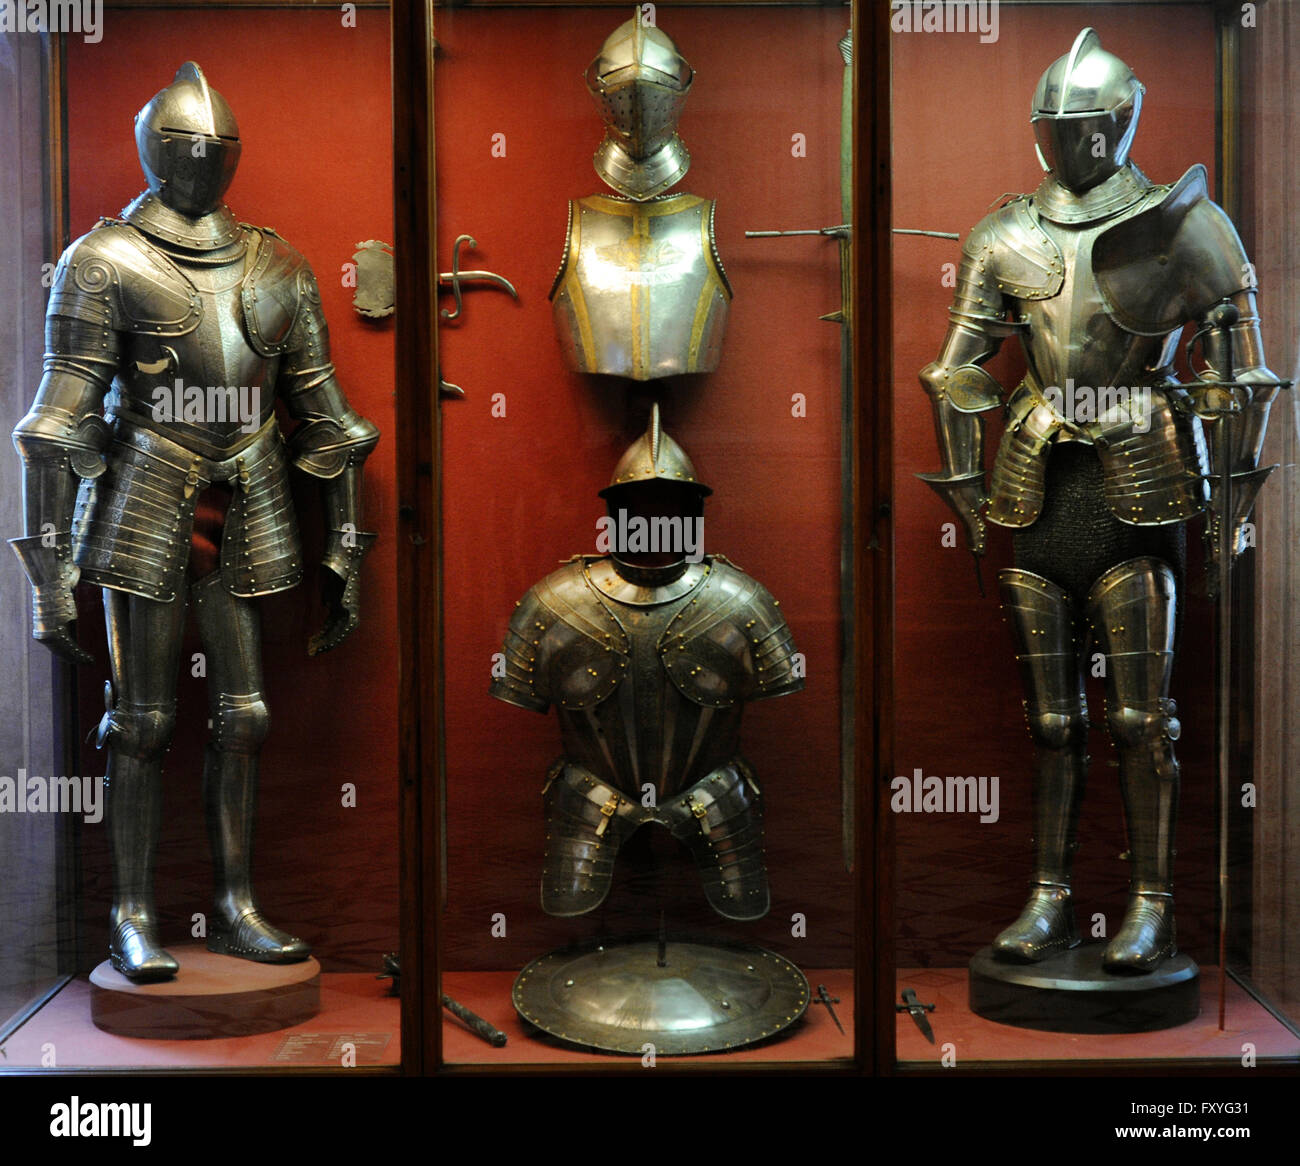 Armours. Italy. 16th century. The Knights' Hall. The State Hermitage Museum. Saint Petersburg. Russia. Stock Photo